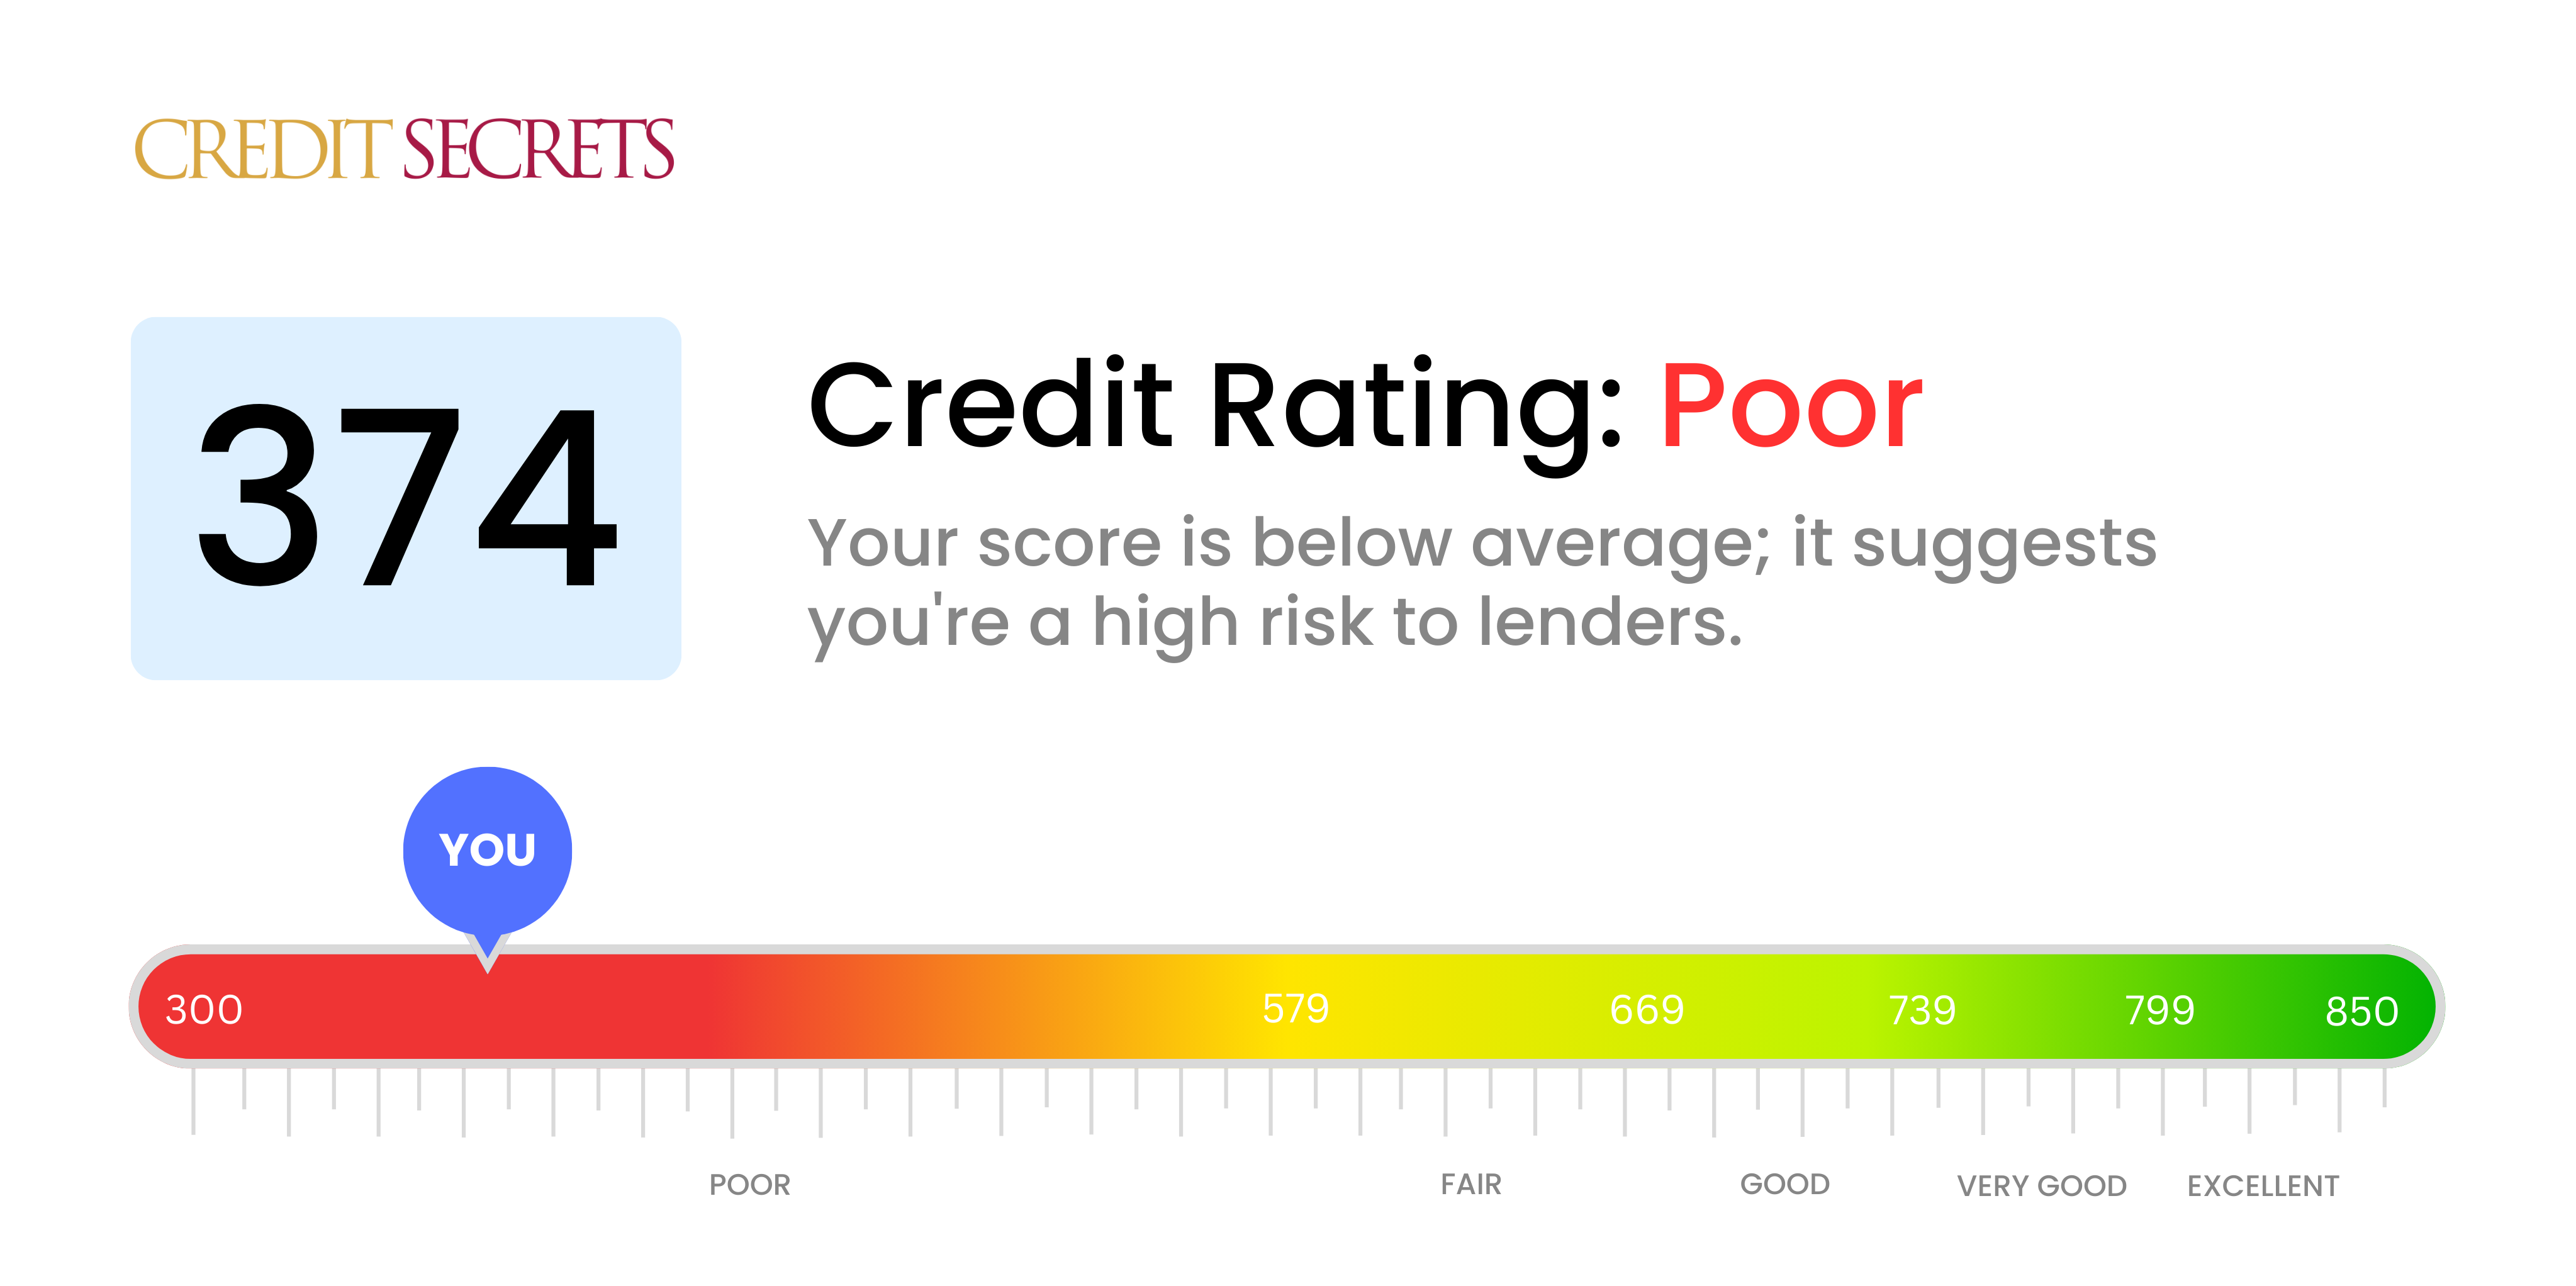 Is 374 a good credit score?